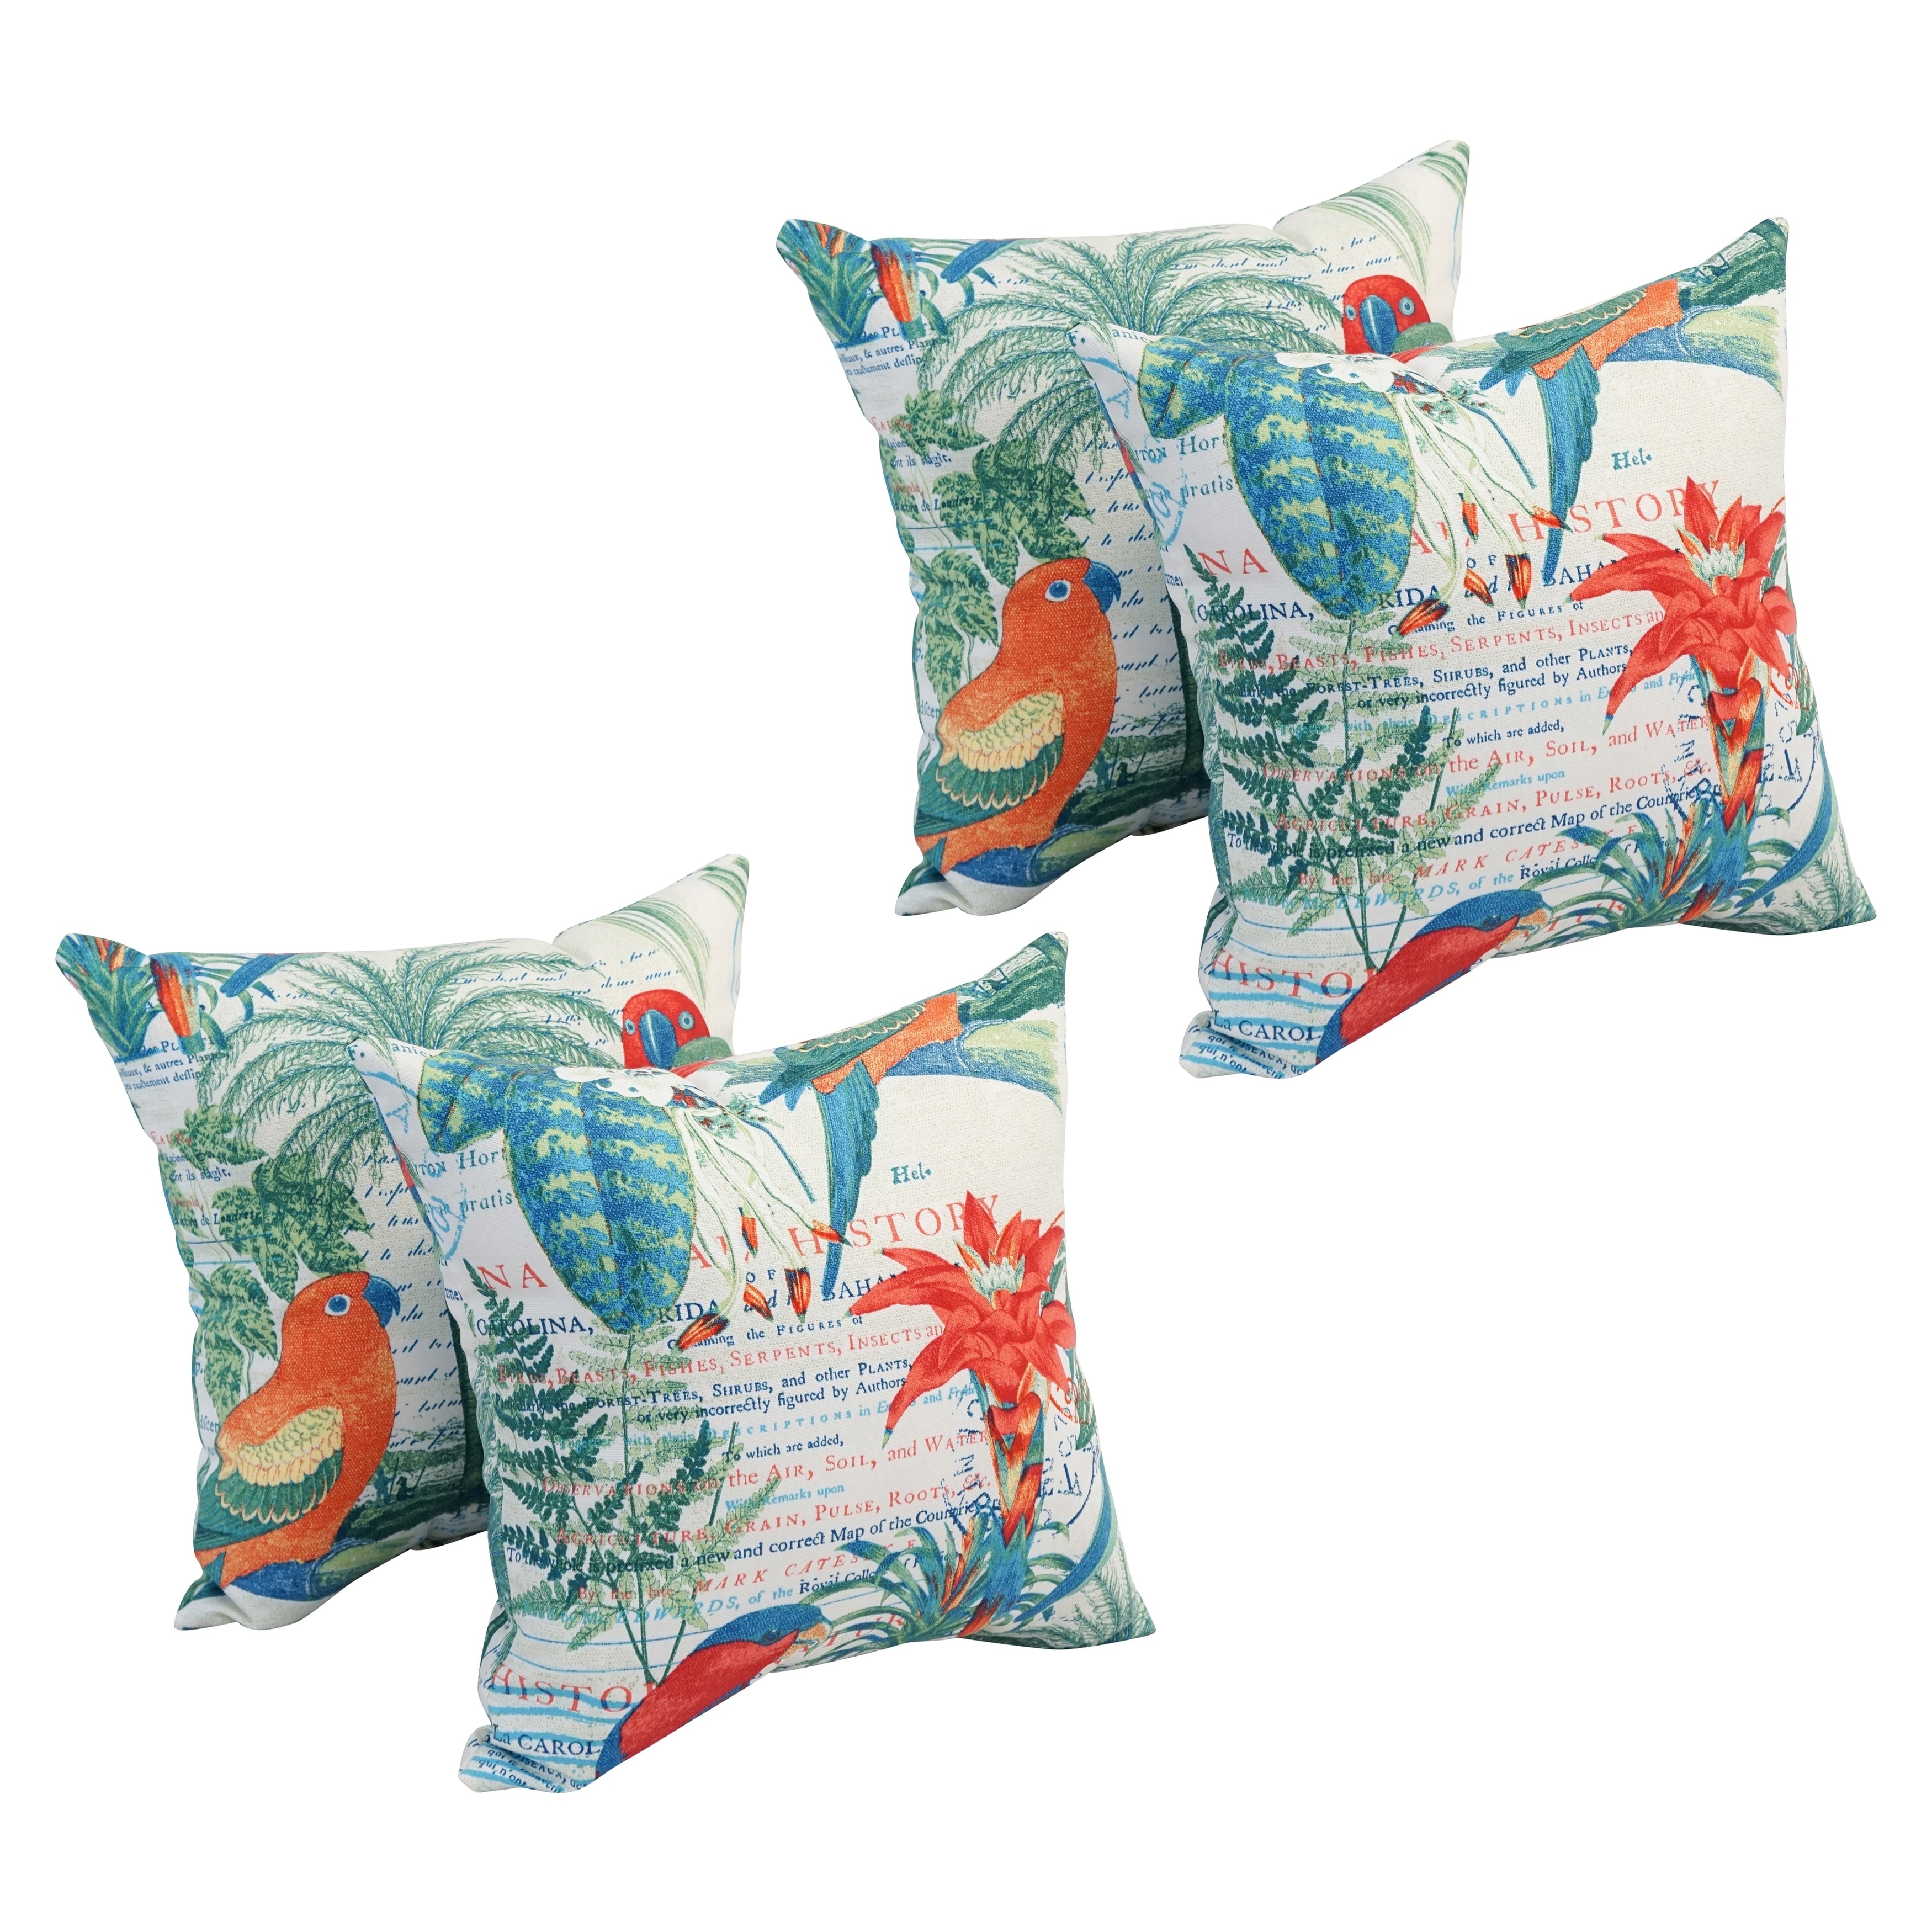 https://ak1.ostkcdn.com/images/products/30971801/17-inch-Square-Polyester-Outdoor-Throw-Pillows-Set-of-4-bf861a91-3e61-48f3-8a3b-008eaac723c2.jpg